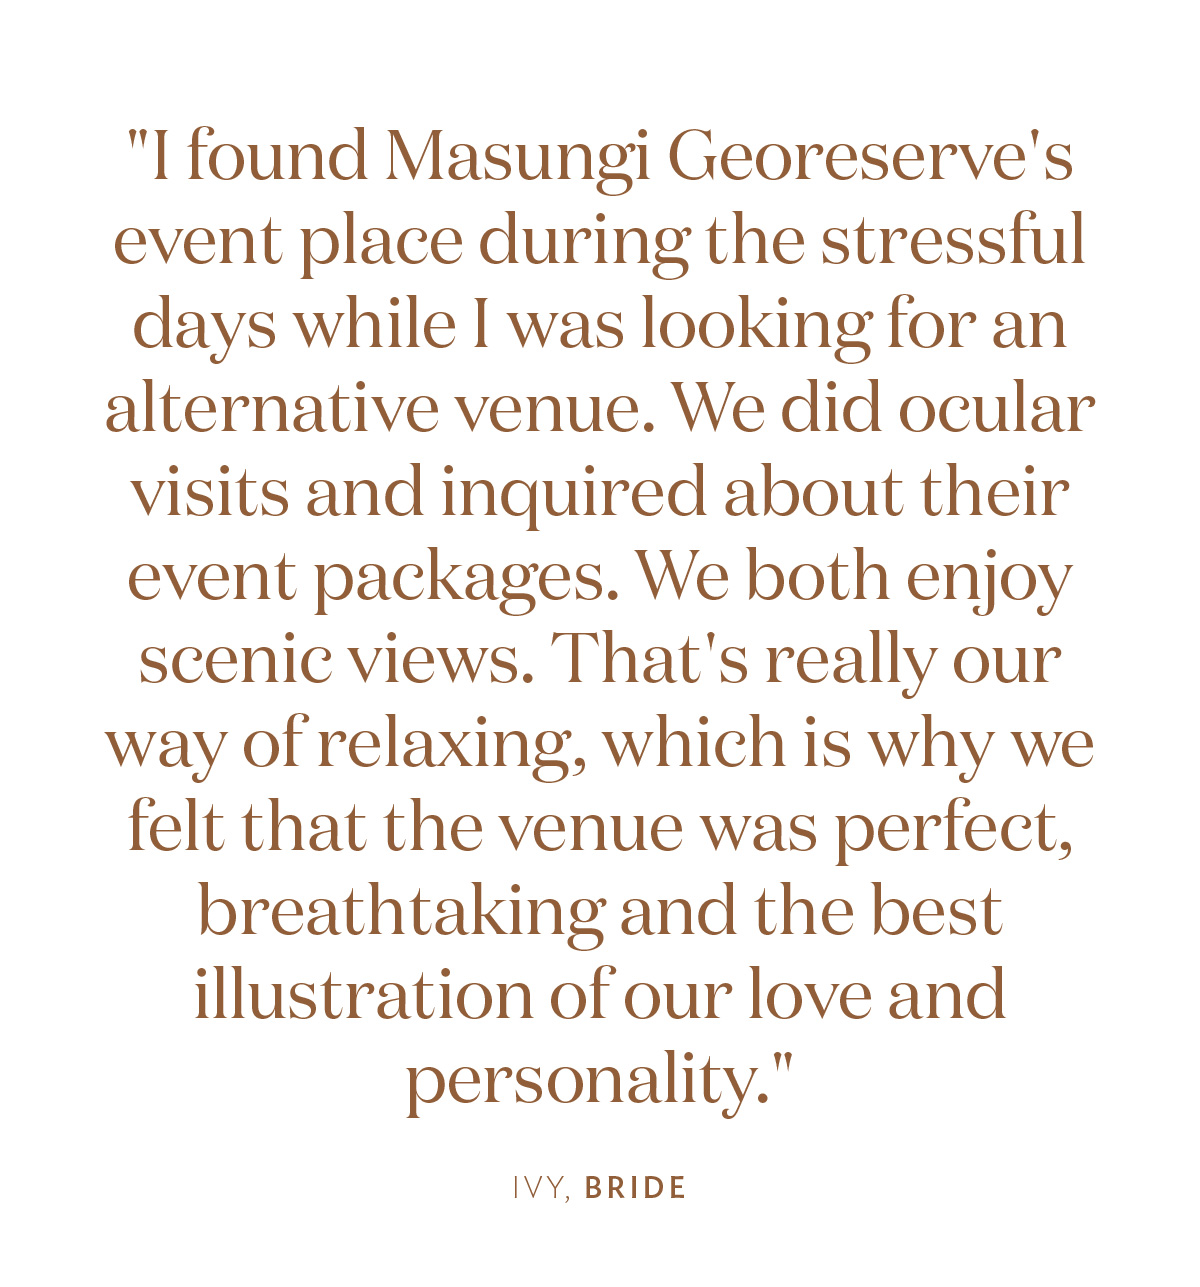 "I found Masungi Georeserve's event place during the stressful days while I was looking for an alternative venue. We did ocular visits and inquired about their event packages. We both enjoy scenic views. That's really our way of relaxing, which is why we felt that the venue was perfect, breathtaking and the best illustration of our love and personality." Ivy, Bride